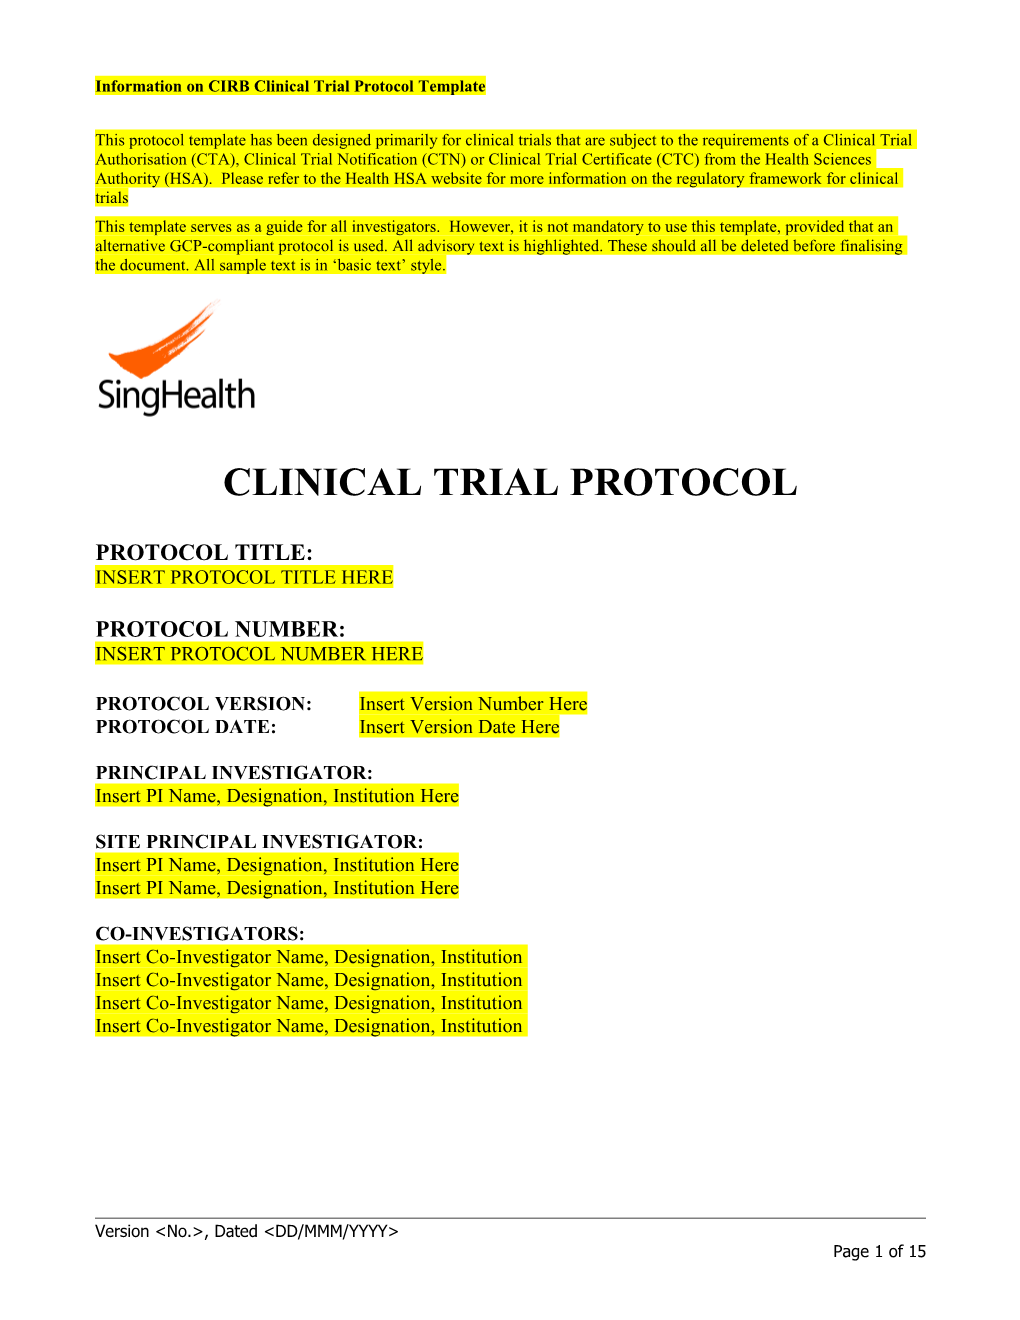 CIRB Clinical Trial Protocol Template